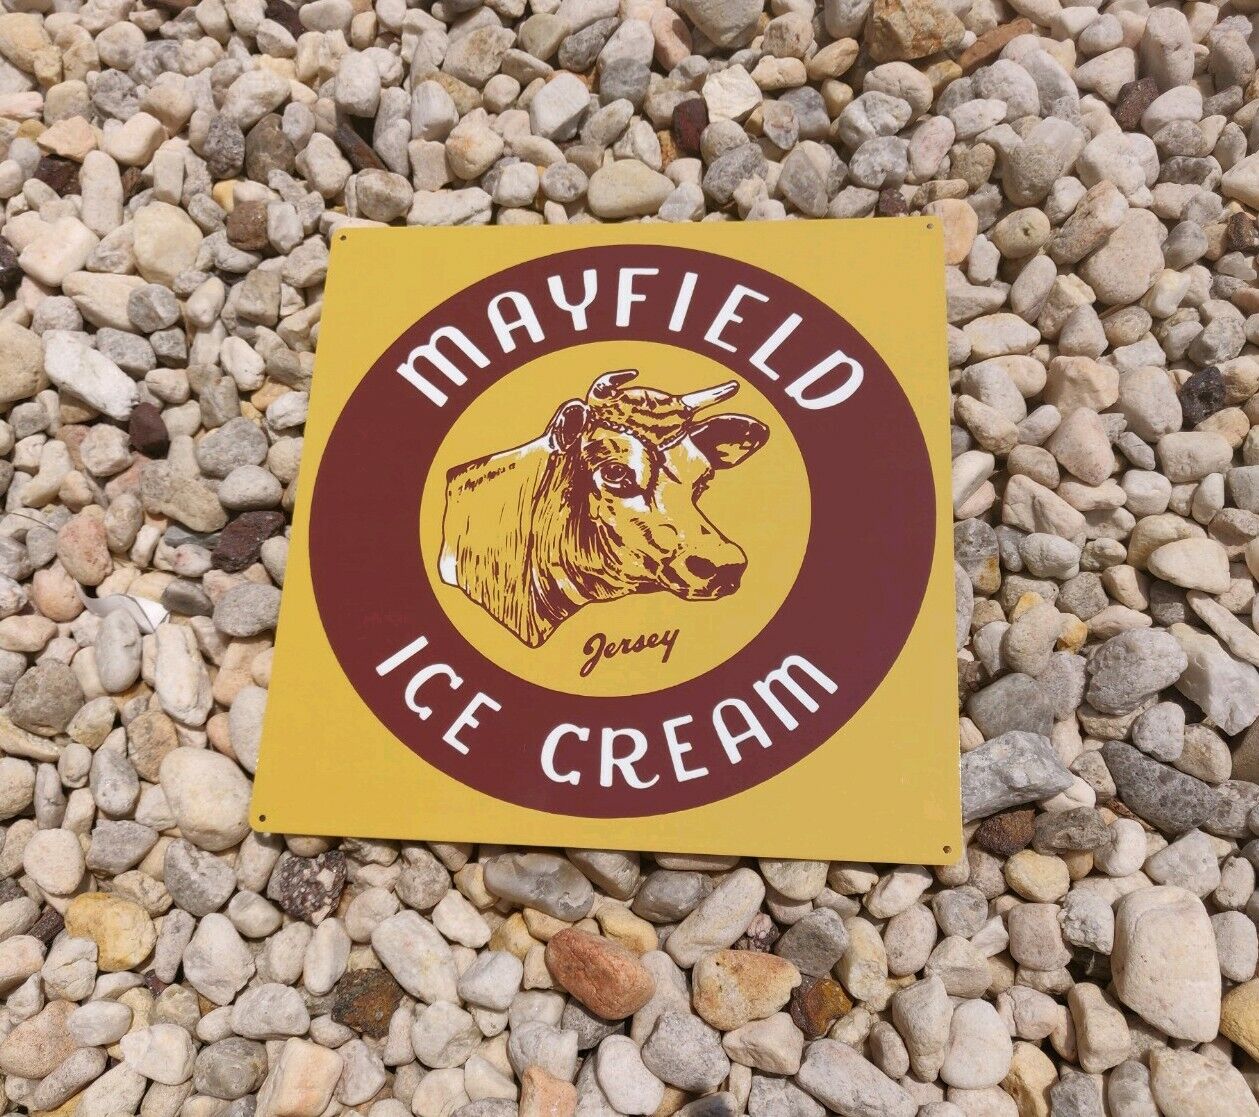 Mayfield Ice cream Milk Dairy Drink Advertising Repro Metal Sign 12x12 50204